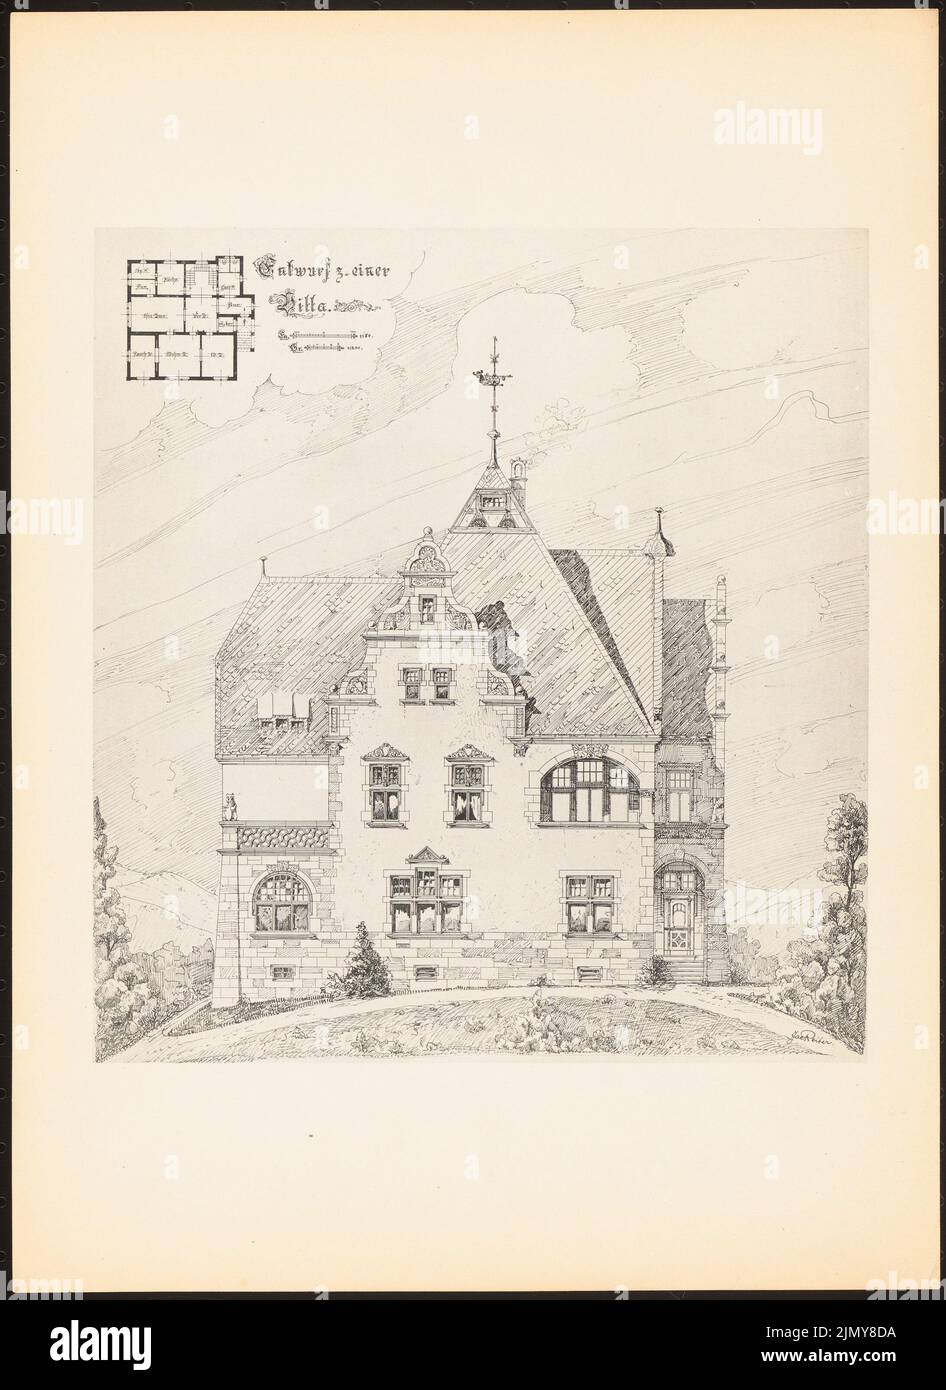 Rider Jacob, villa. (From: Prints of seminar works by the Royal Technical University of Berlin, Vol. II) (1890-1902): floor plan, side view. Print on paper, 33.5 x 24.4 cm (including scan edges) Stock Photo